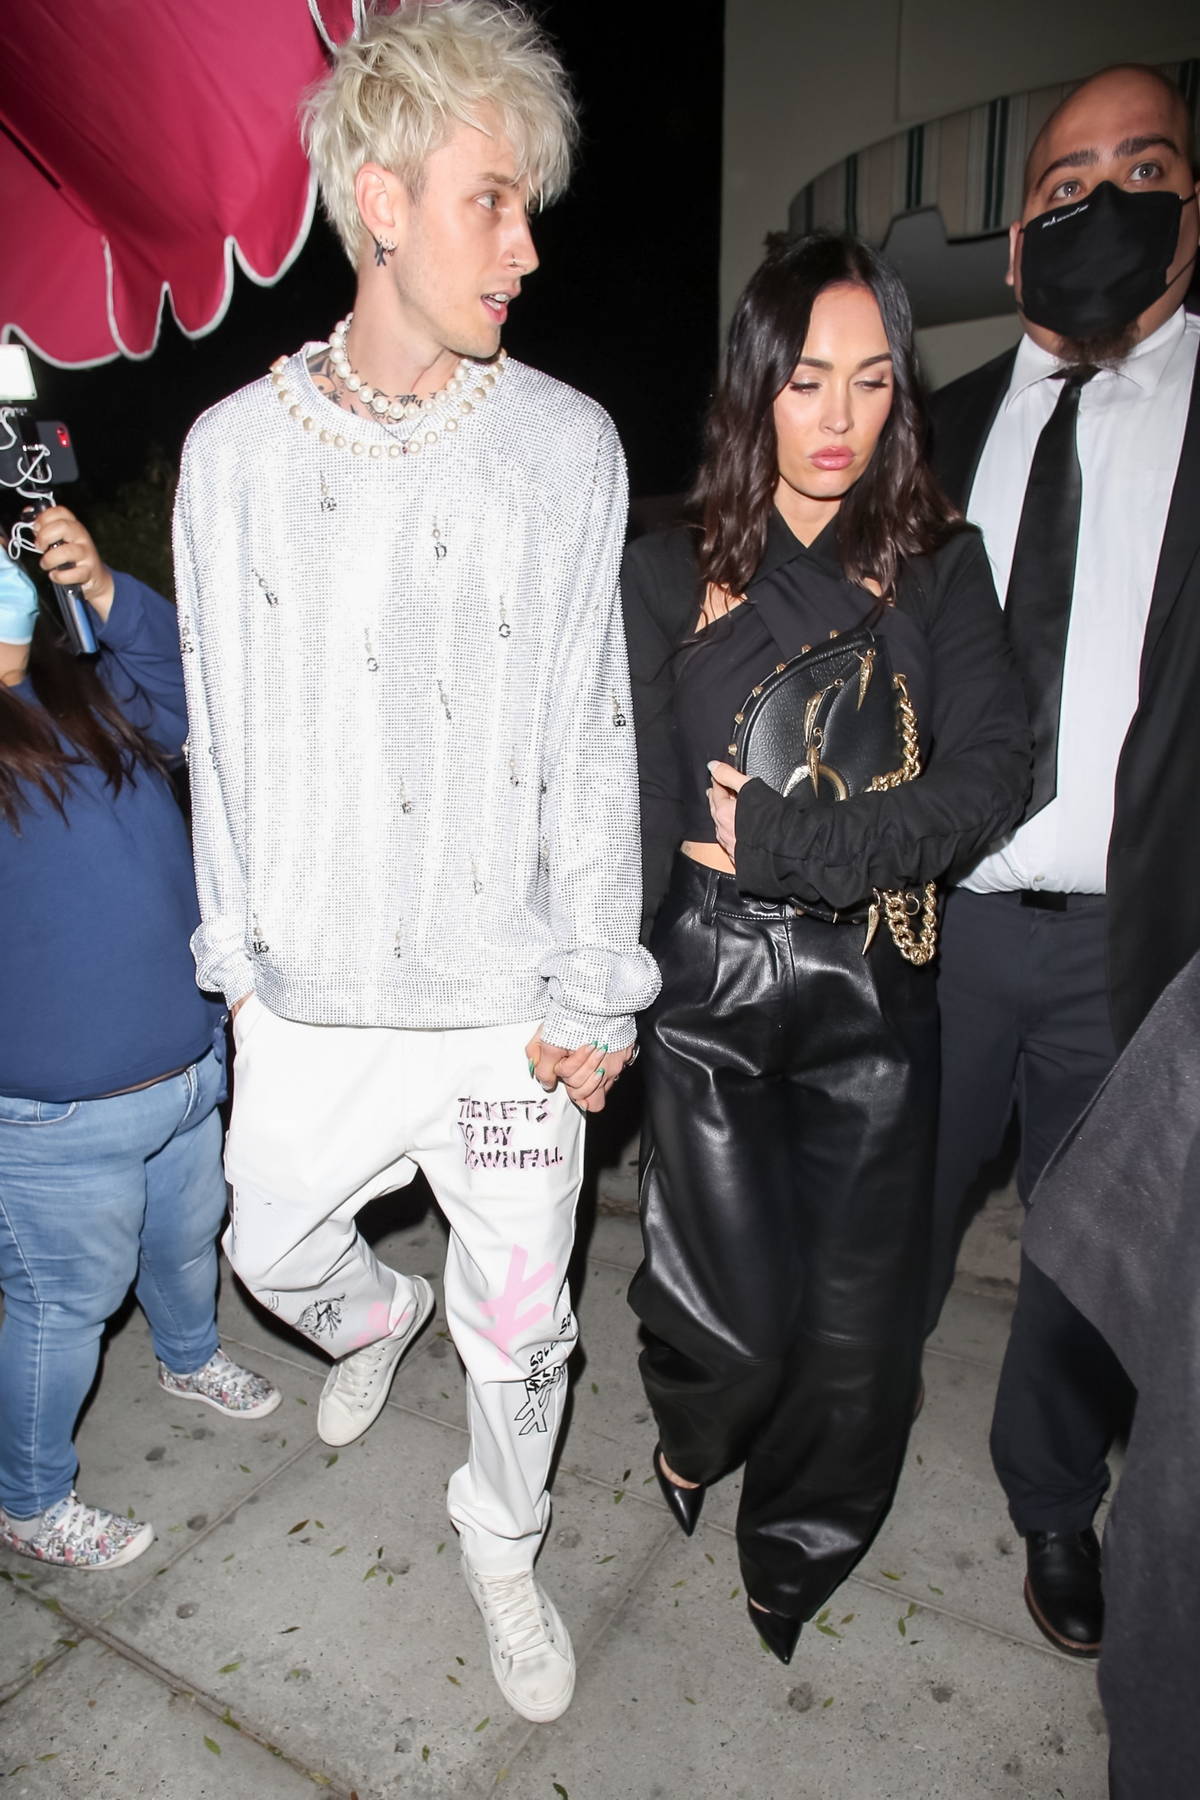 megan fox and machine gun kelly hold hands as they leave after a